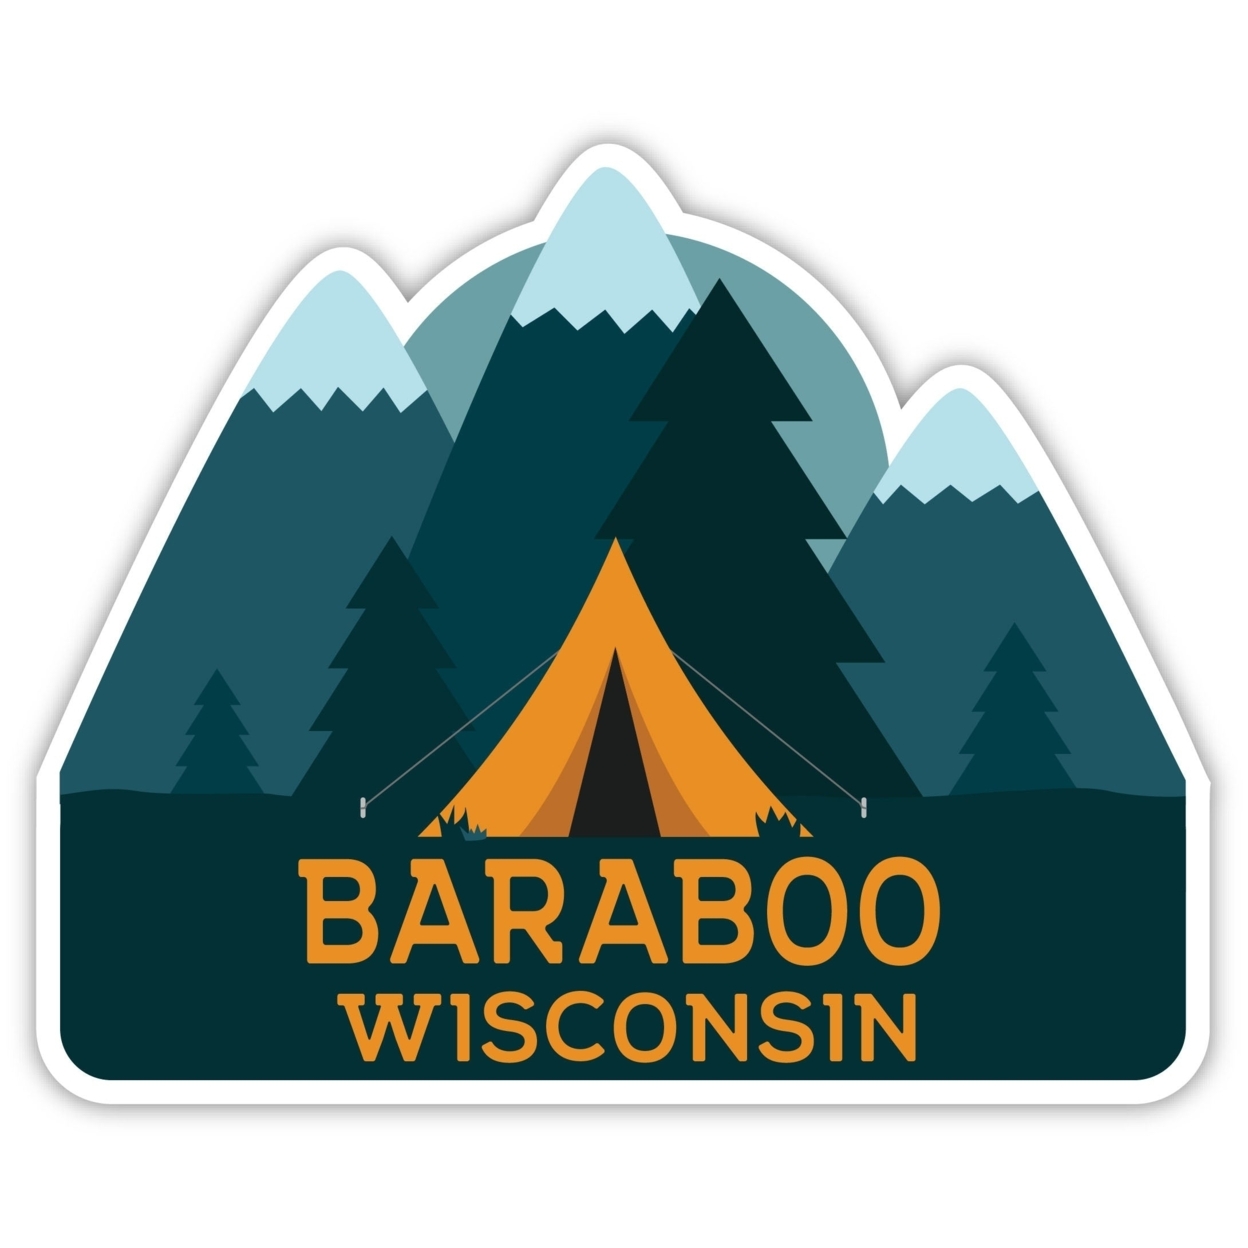 Baraboo Wisconsin Souvenir Decorative Stickers (Choose Theme And Size) - 4-Pack, 4-Inch, Tent